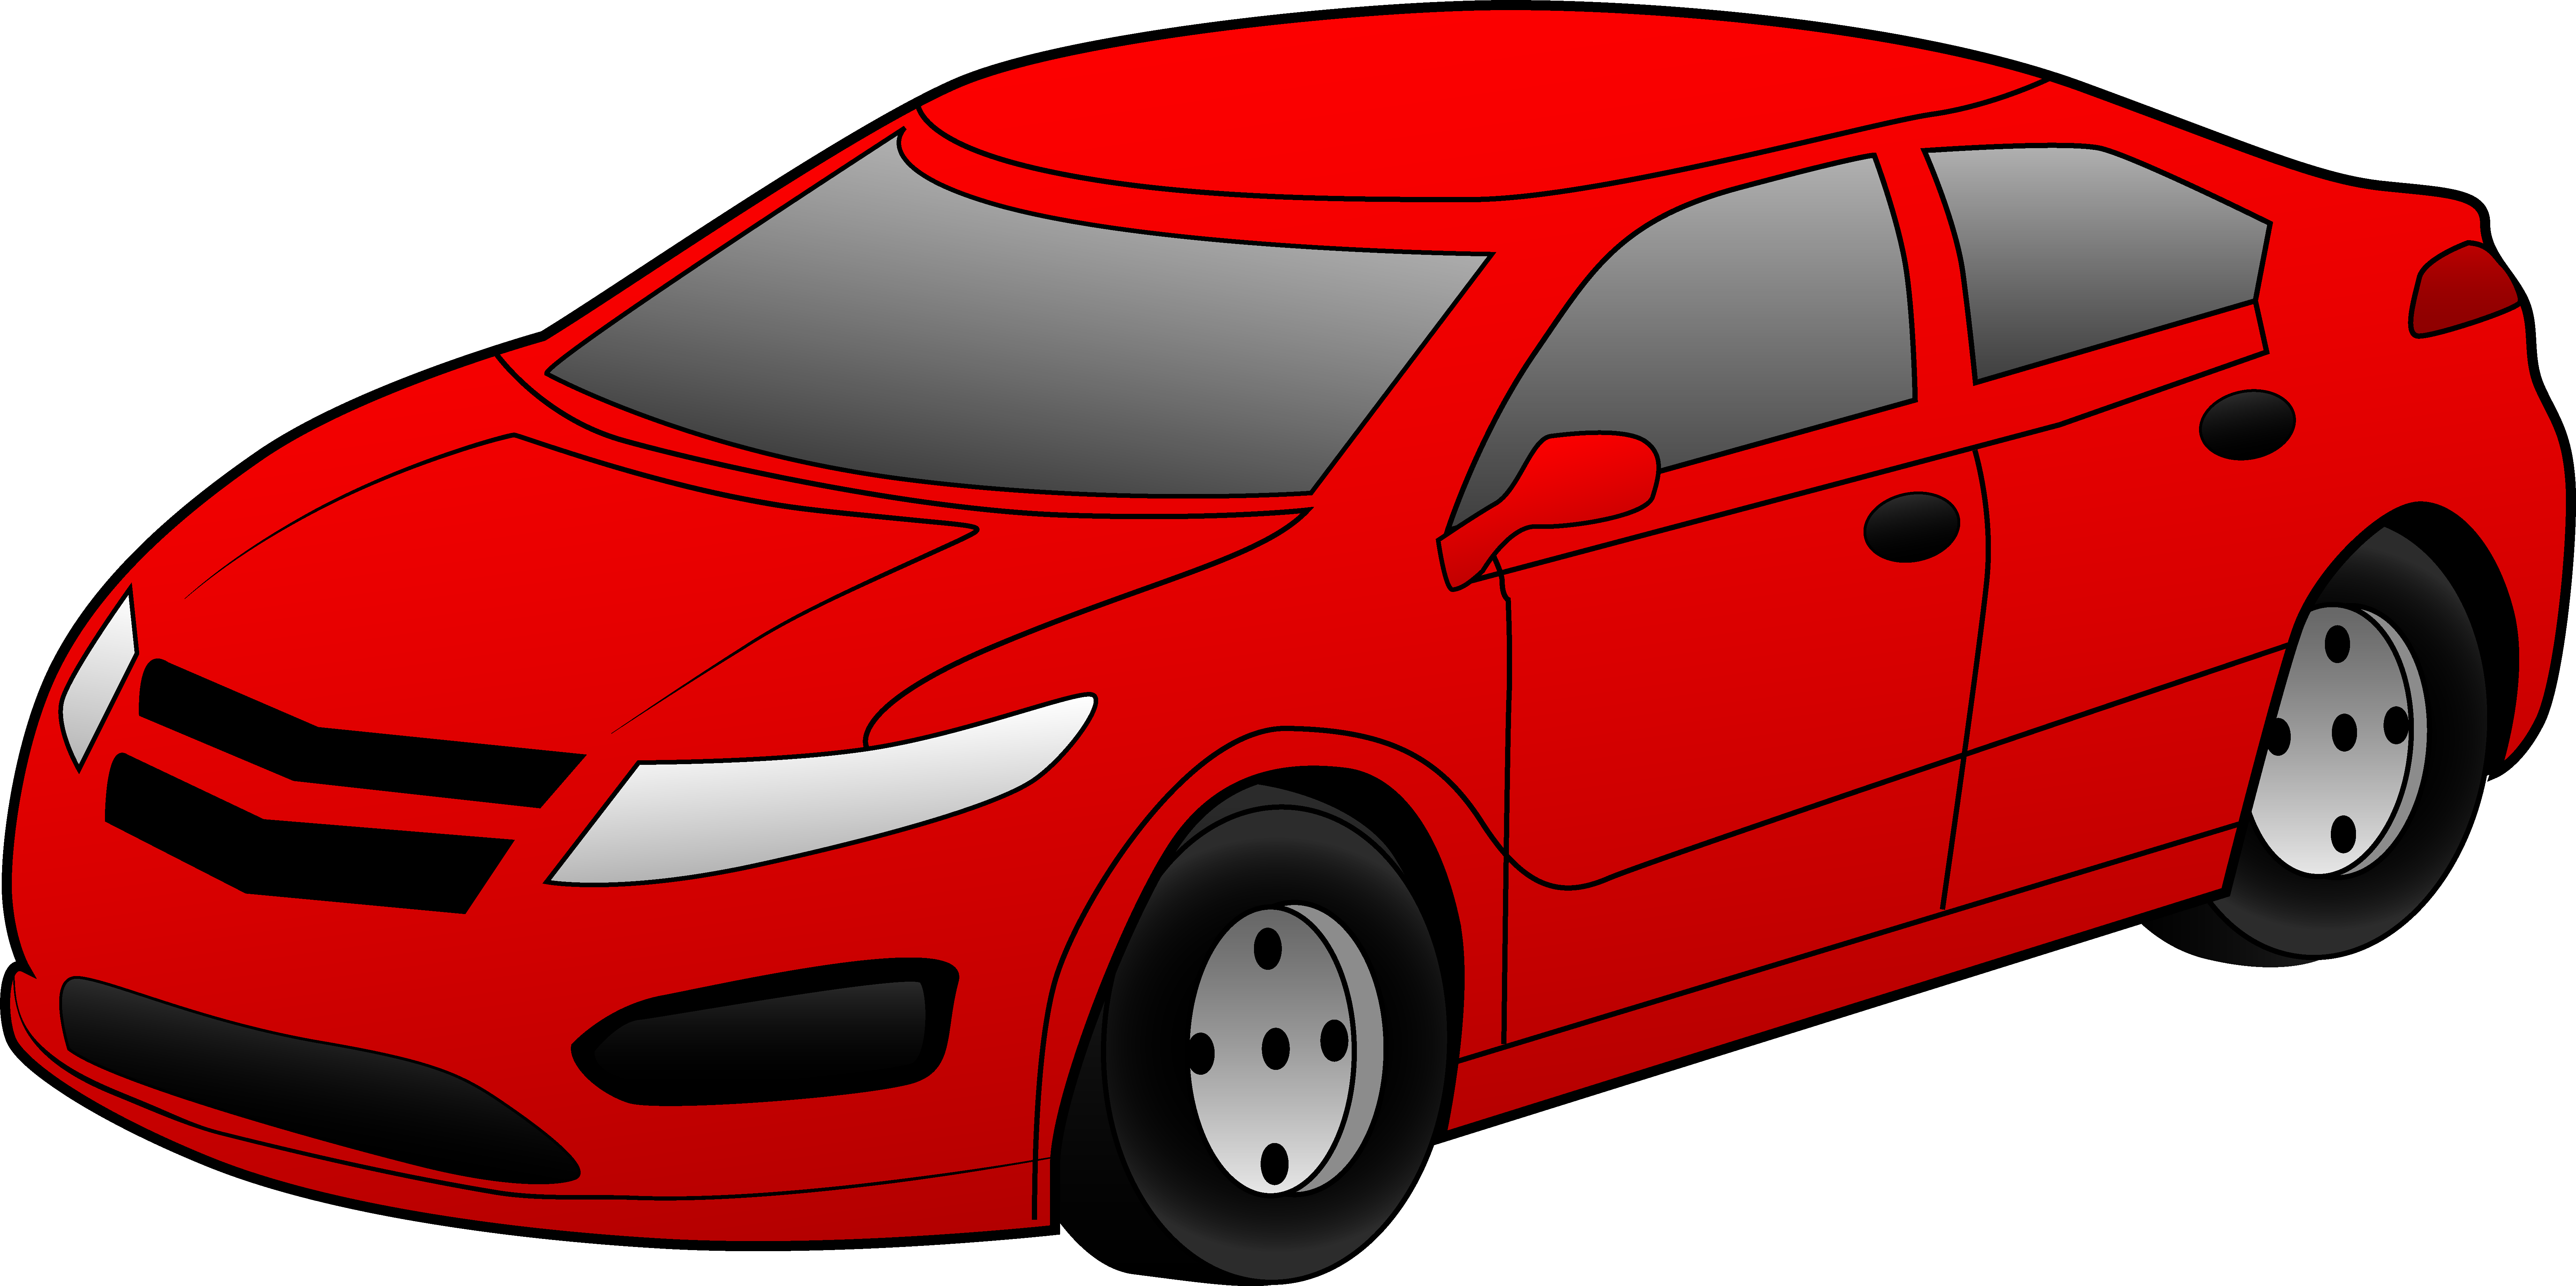 Kids toy car clipart